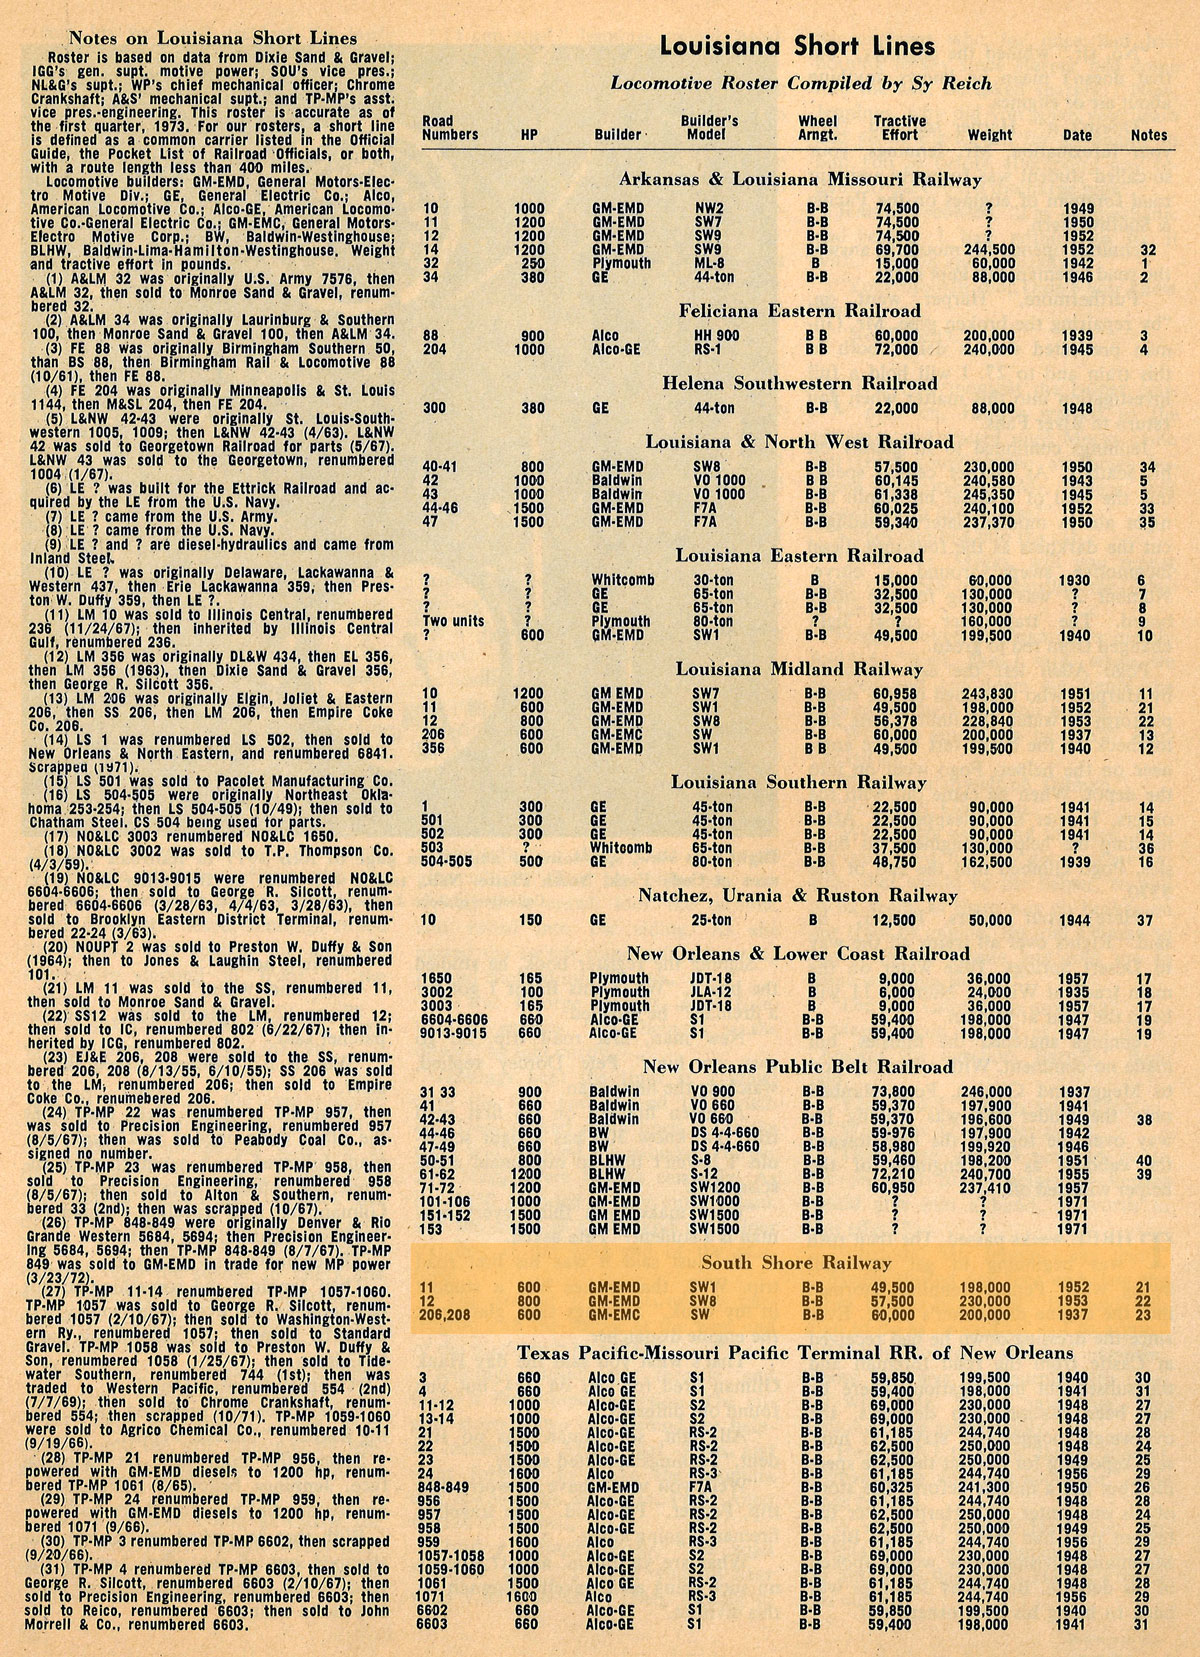 ssh_roster_clipping1973